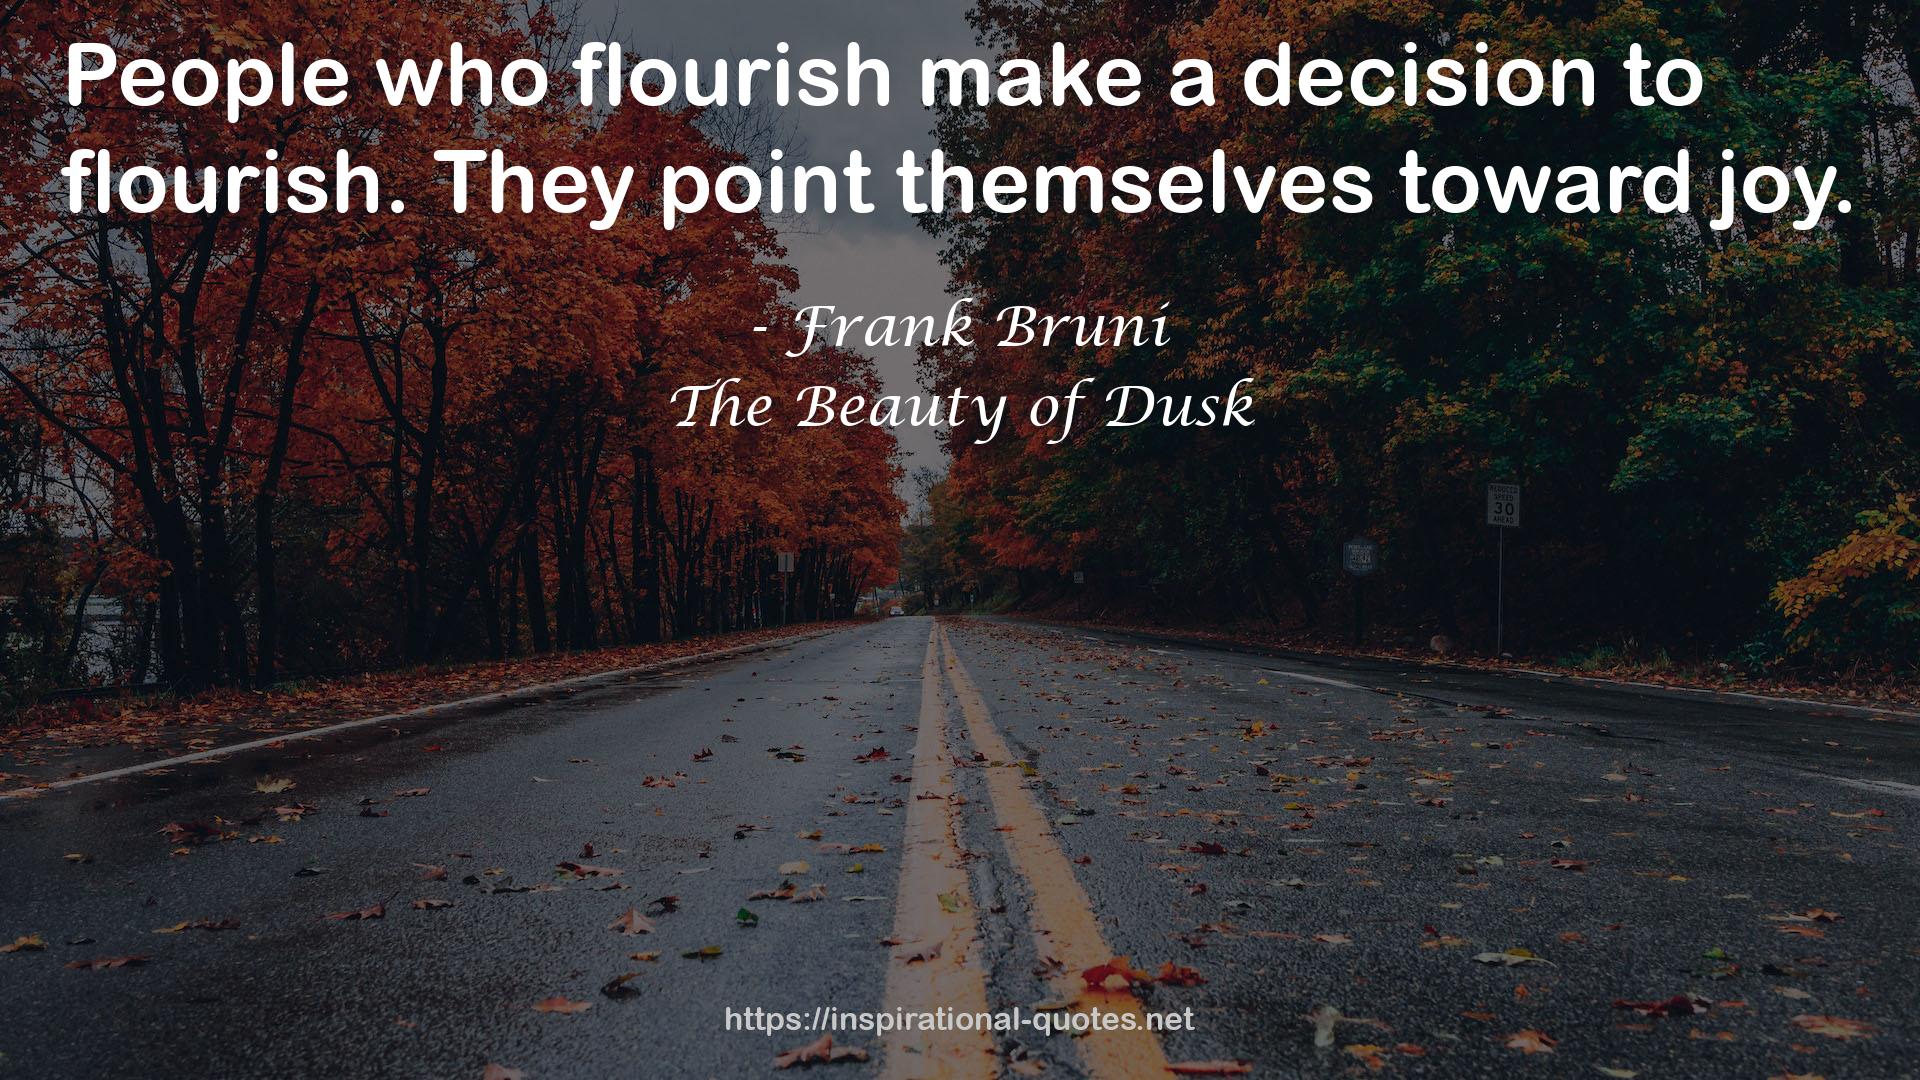 The Beauty of Dusk QUOTES